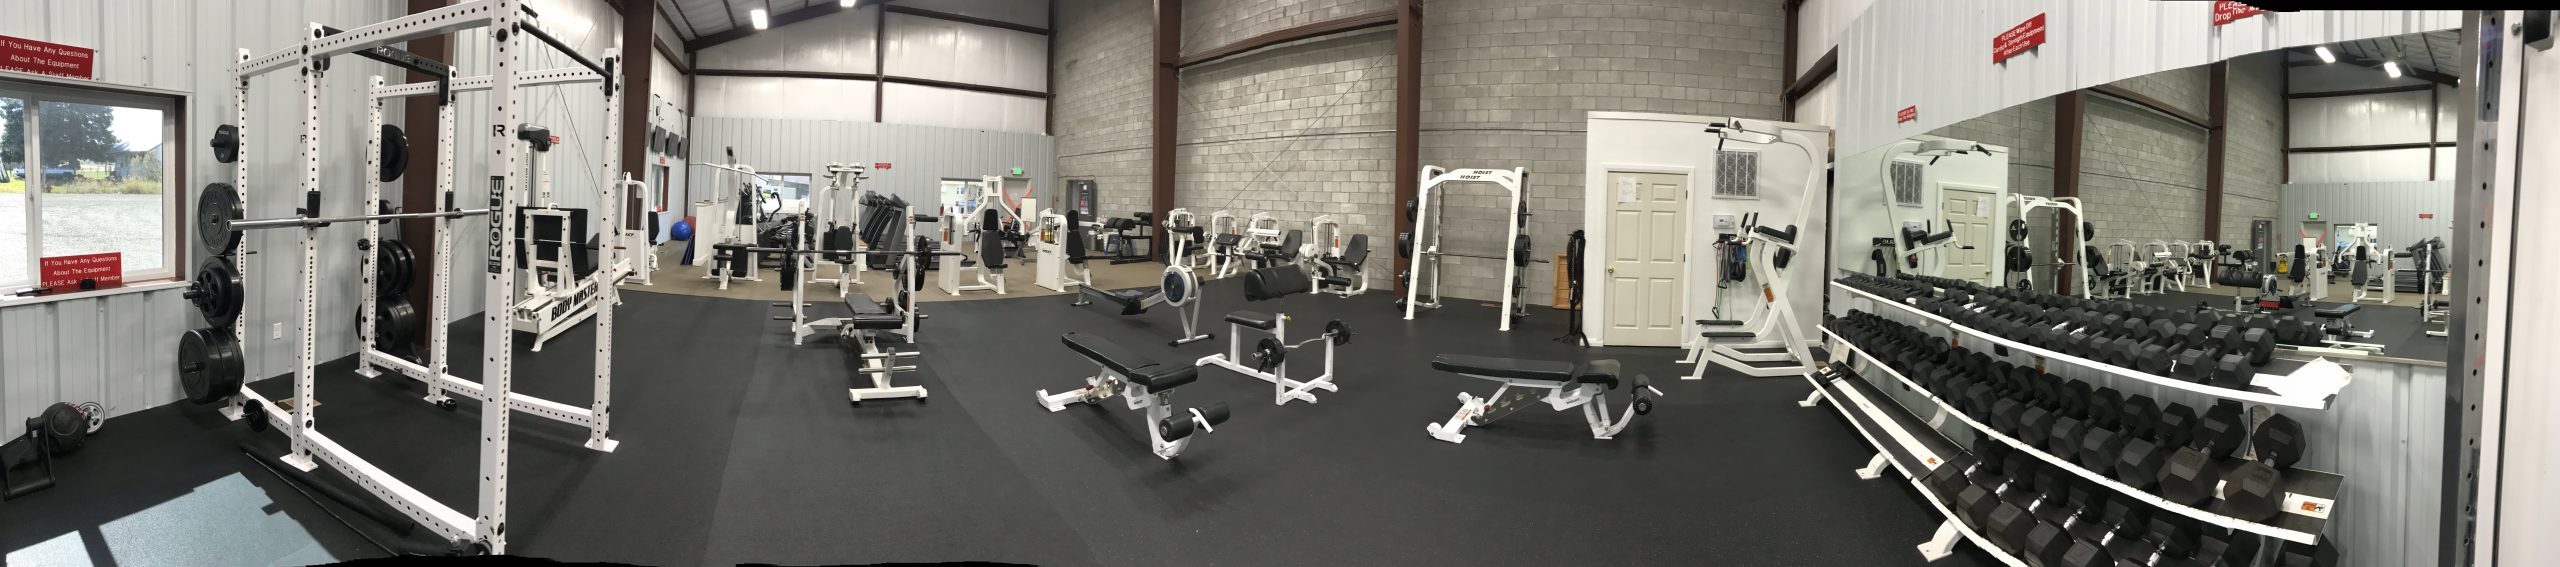 Image of exercise equipment at Peak Fitness Afton, WY location